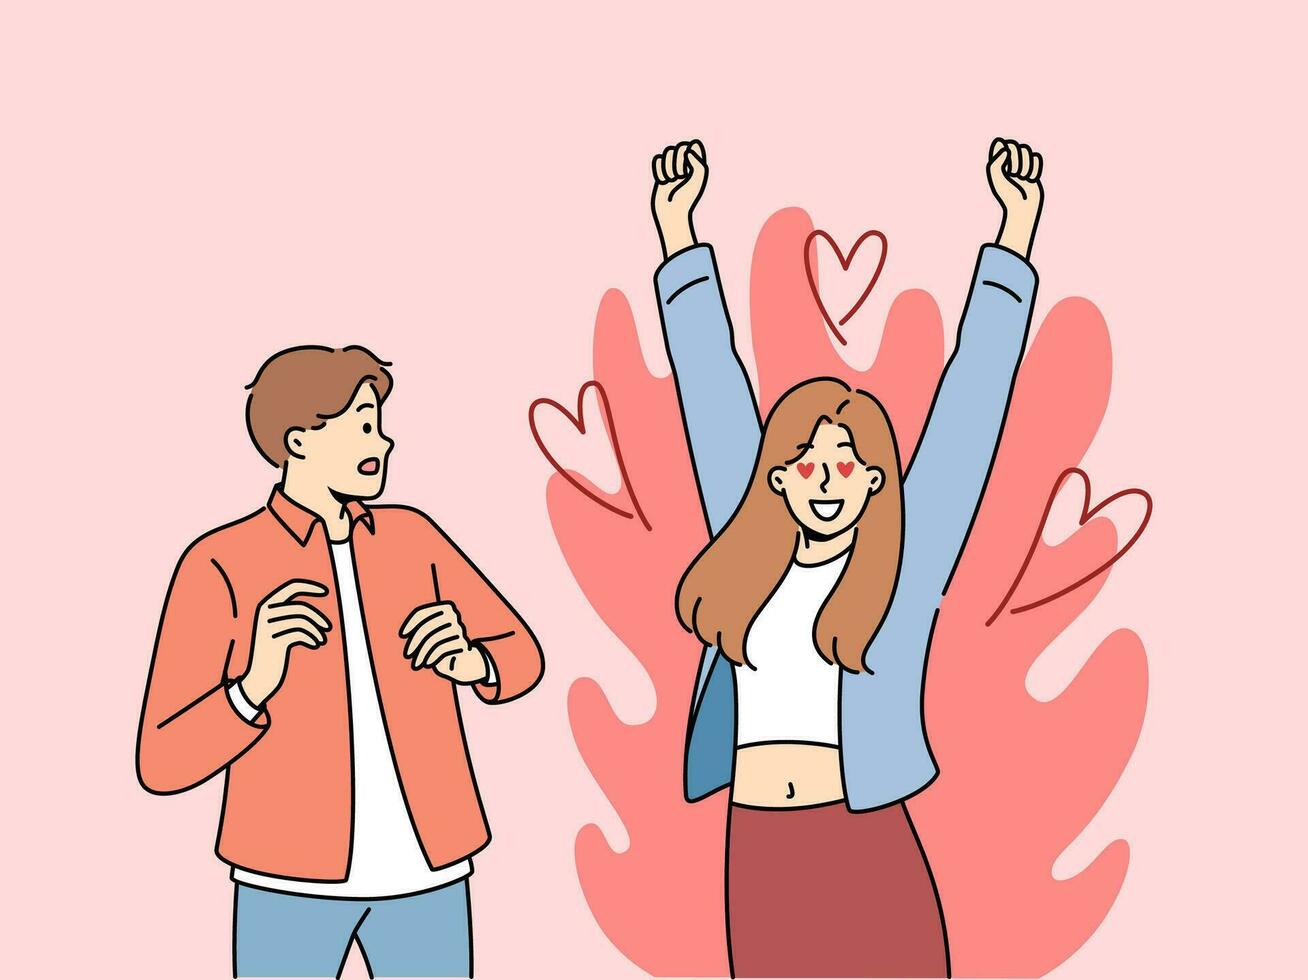 Excited woman is in love with man who is scared because of excessive passion from fan. Guy looks excitedly at girlfriend feeling great passion and sympathy for boyfriend or fiance. vector